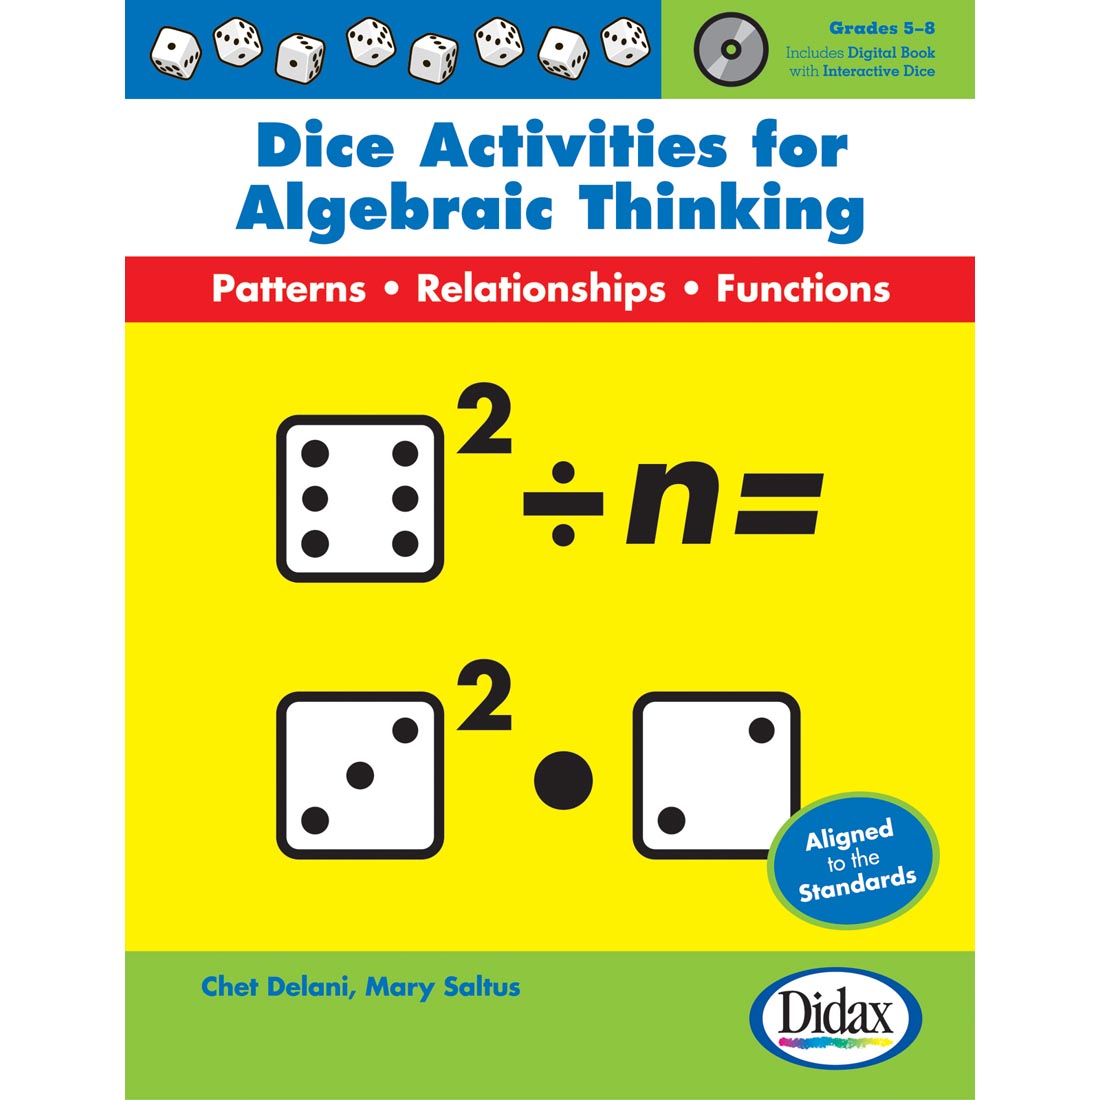 Dice Activities for Algebraic Thinking Book by Didax